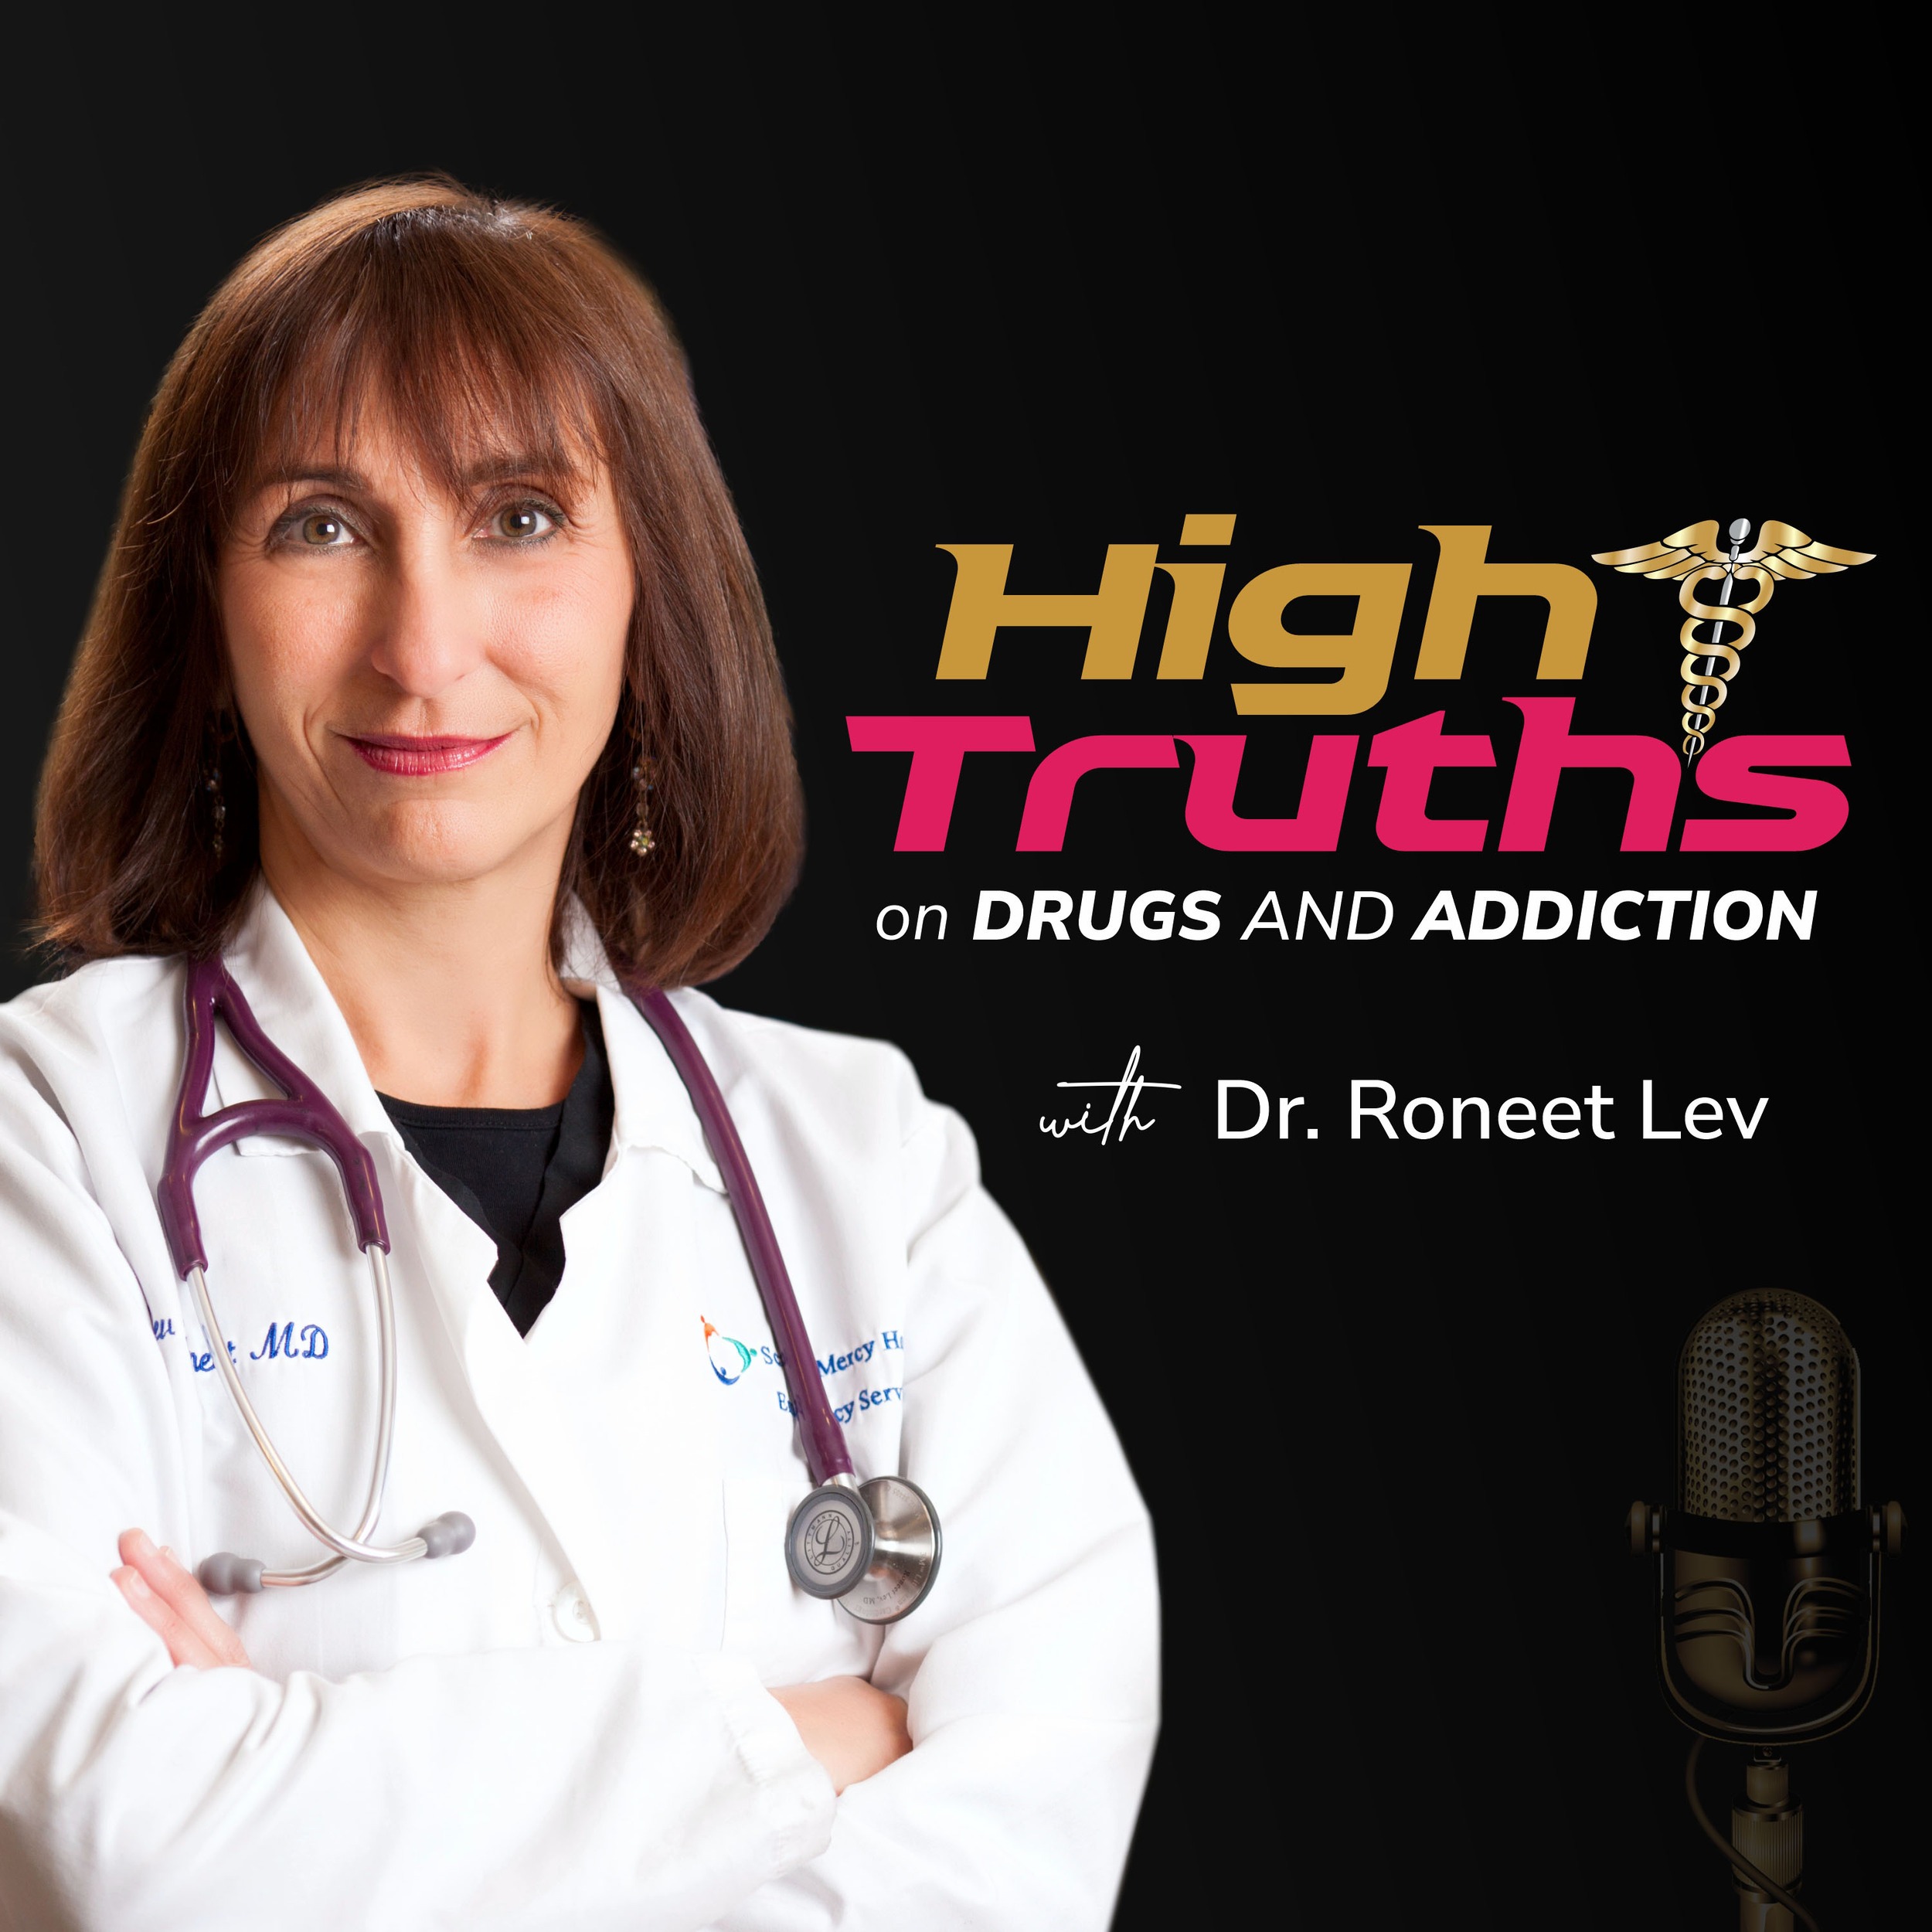 Episode # 90 High Truths on Drugs and Addiction with Dr. Shannon Murphy on Talking to Kids on Marijuana